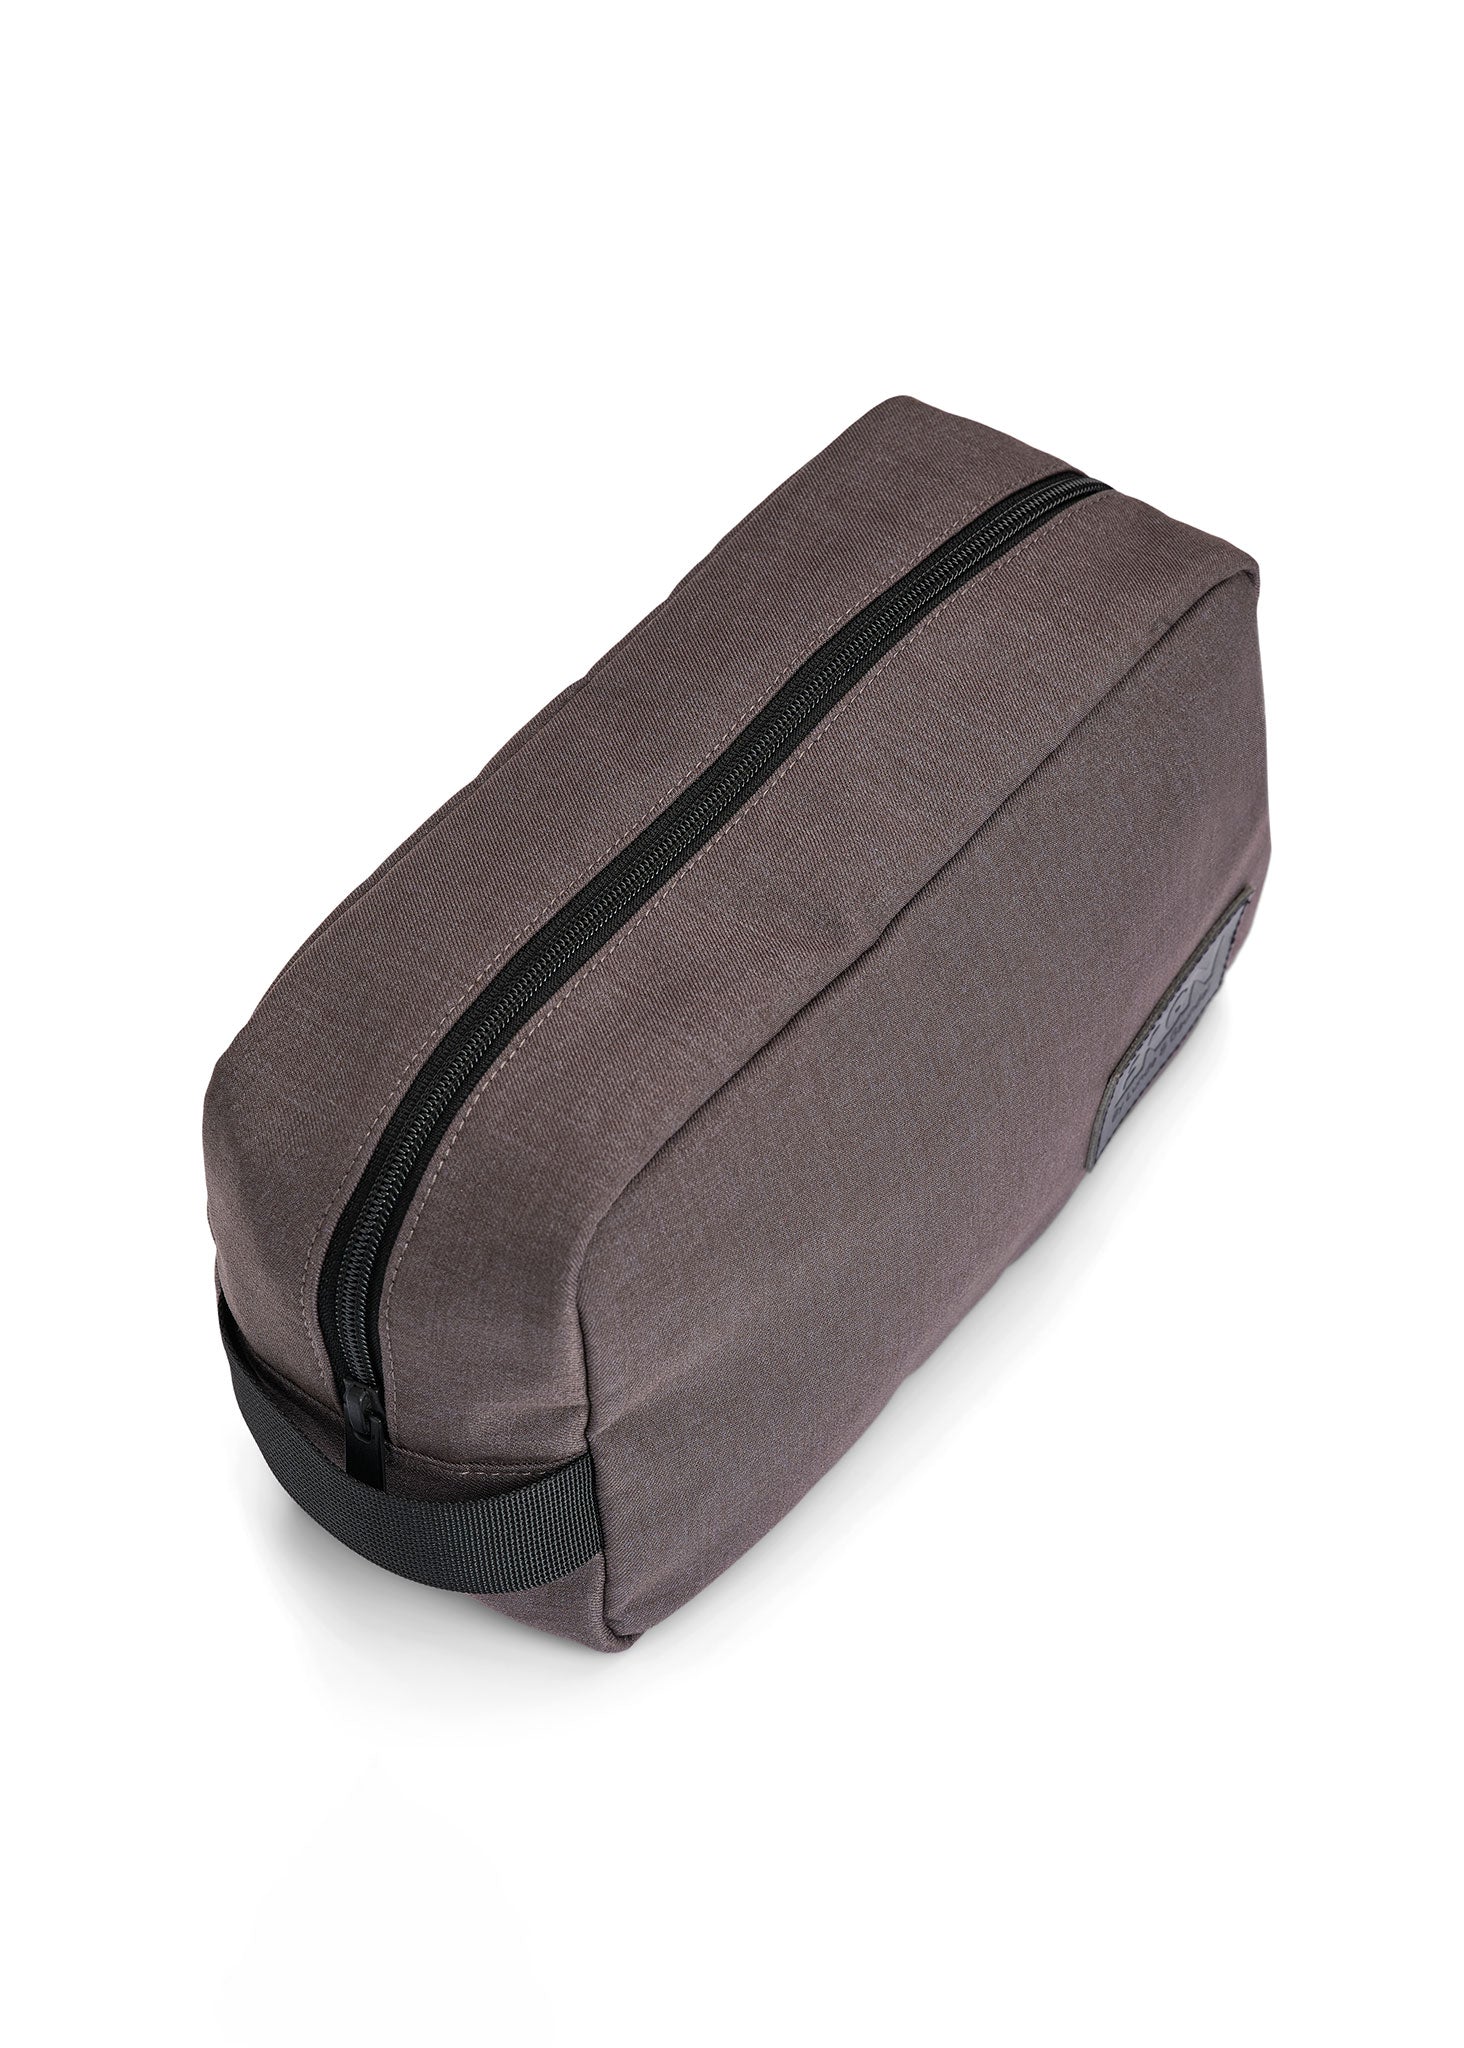 BRGN by Lunde & Gaundal Medium toiletry bag Accessories 085 Concrete Grey